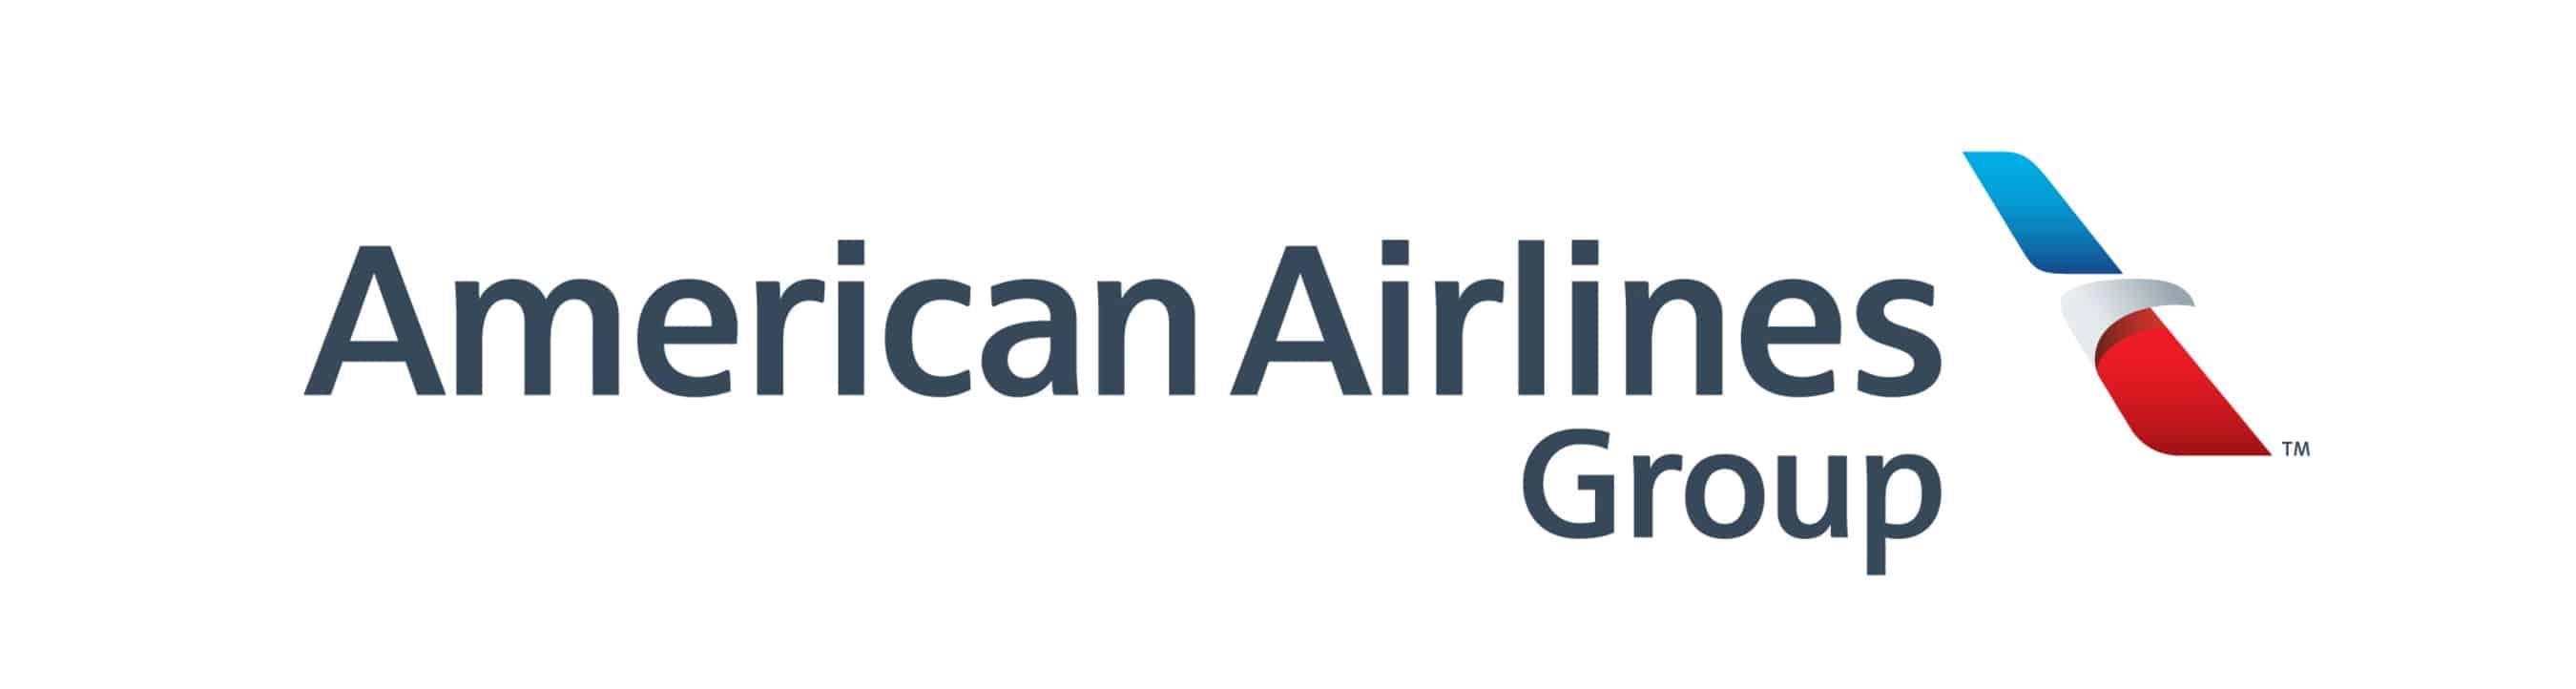 American Airlines Group Logo 